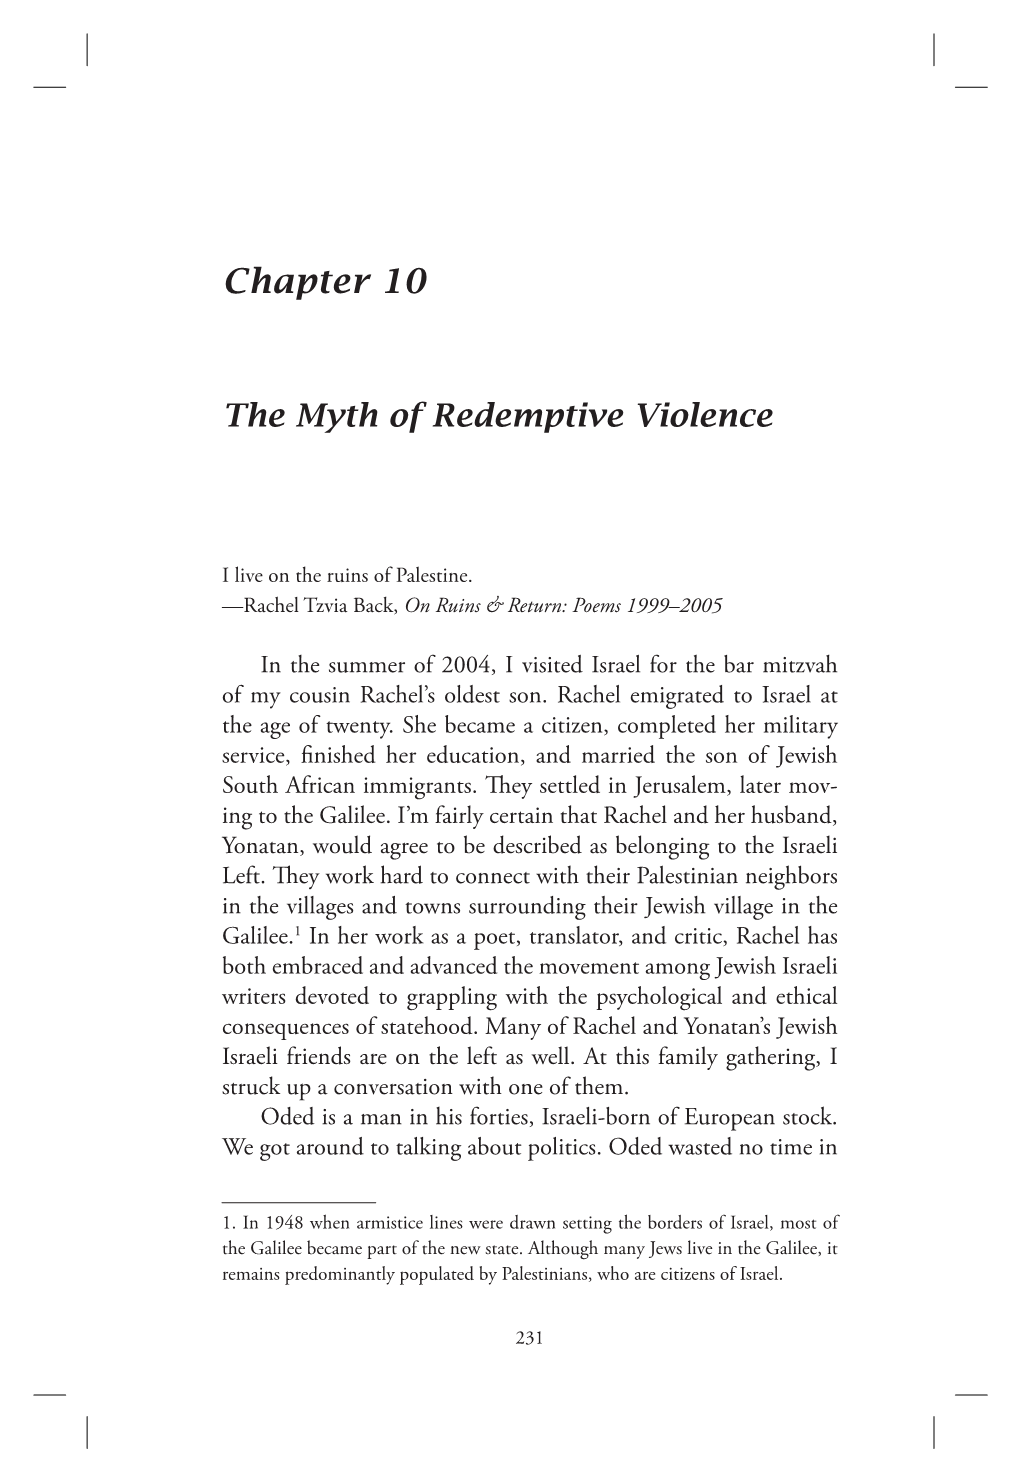 Chapter 10: the Myth of Redemptive Violence